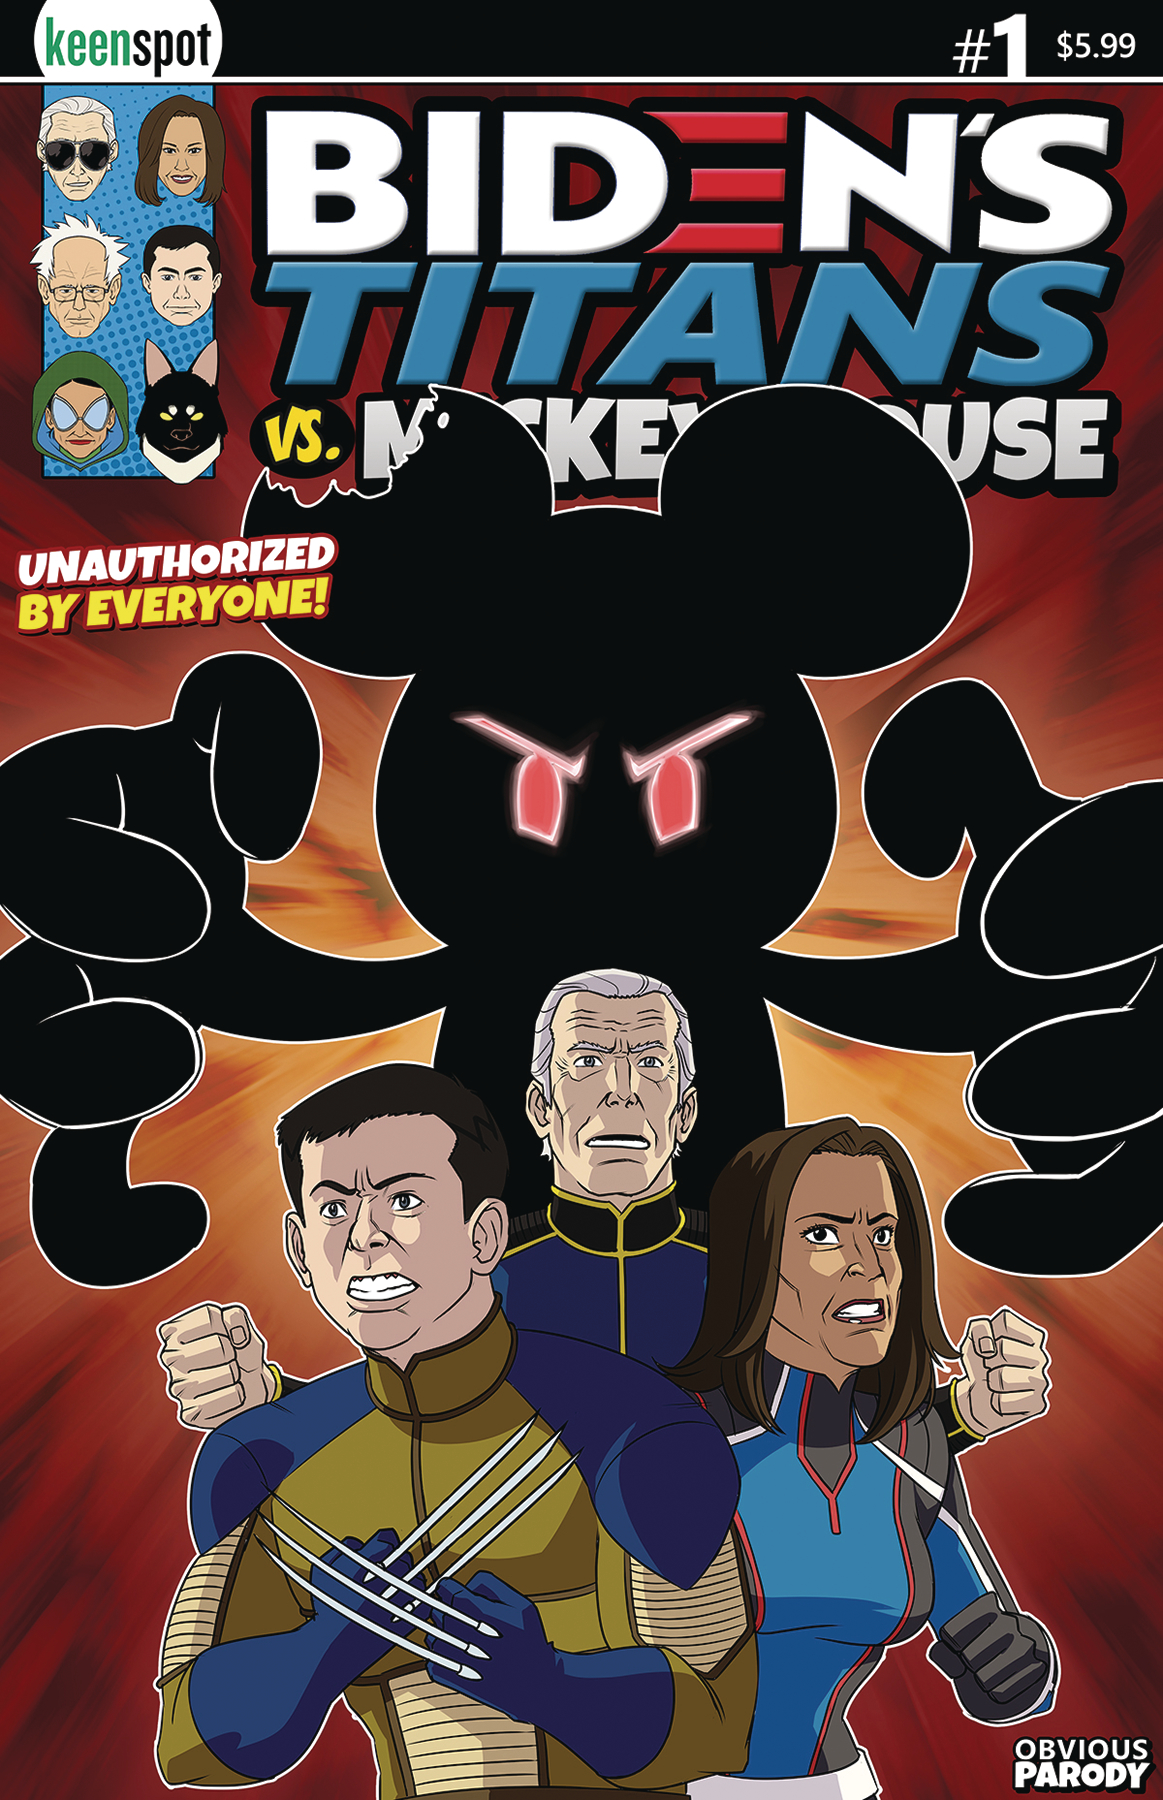 Bidens Titans Vs Mickey Mouse (Unauthorized) #1 Cover A Mickey Unleashed